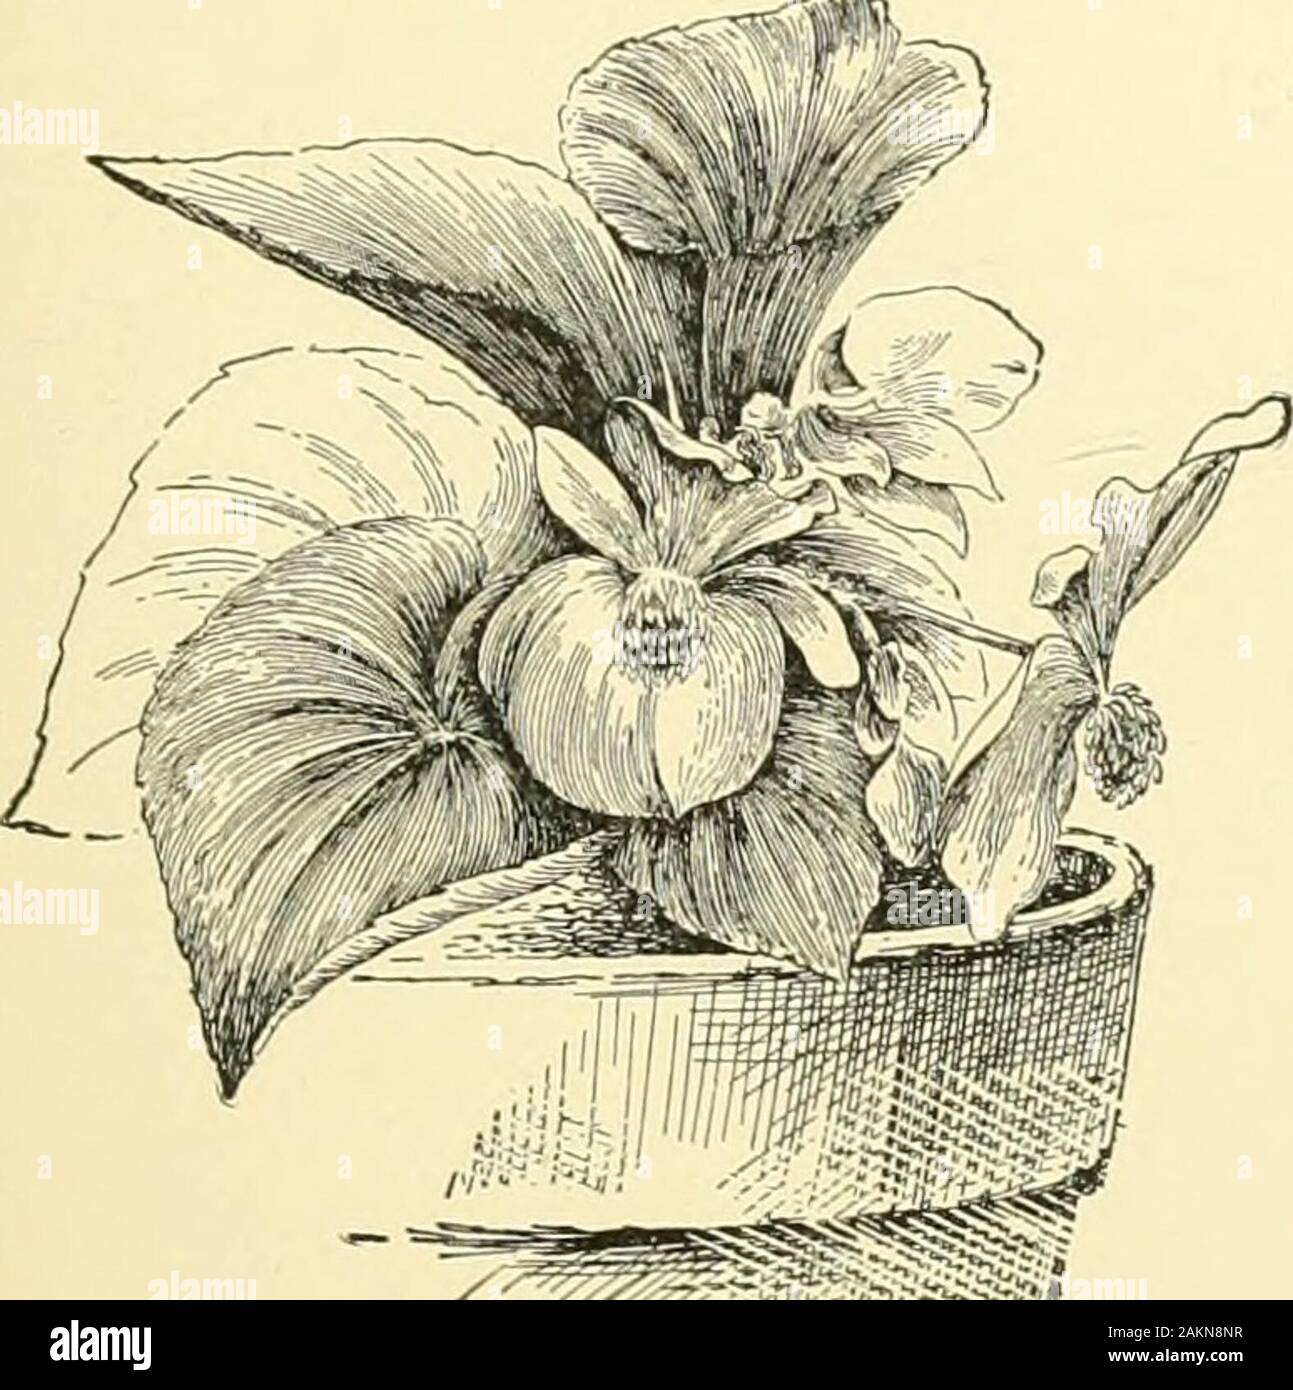 Cyclopedia of American horticulture, comprising suggestions for cultivation of horticultural plants, descriptions of the species of fruits, vegetables, flowers and ornamental plants sold in the United States and Canada, together with geographical and biographical sketches, and a synopsis of the vegetable kingdom . :sts. tall and succulent: Ivs. ovate, IJ^in. long, tingedwith red when young : fls. droopiner like a fuchsia, rich. 209. Begonia sempeHlorens. A recently struck cutting. To show the precocity of bloom.No. 20. scarlet, males with i petals, females with 5 petals. NewGranada. B.M. 4281. Stock Photo